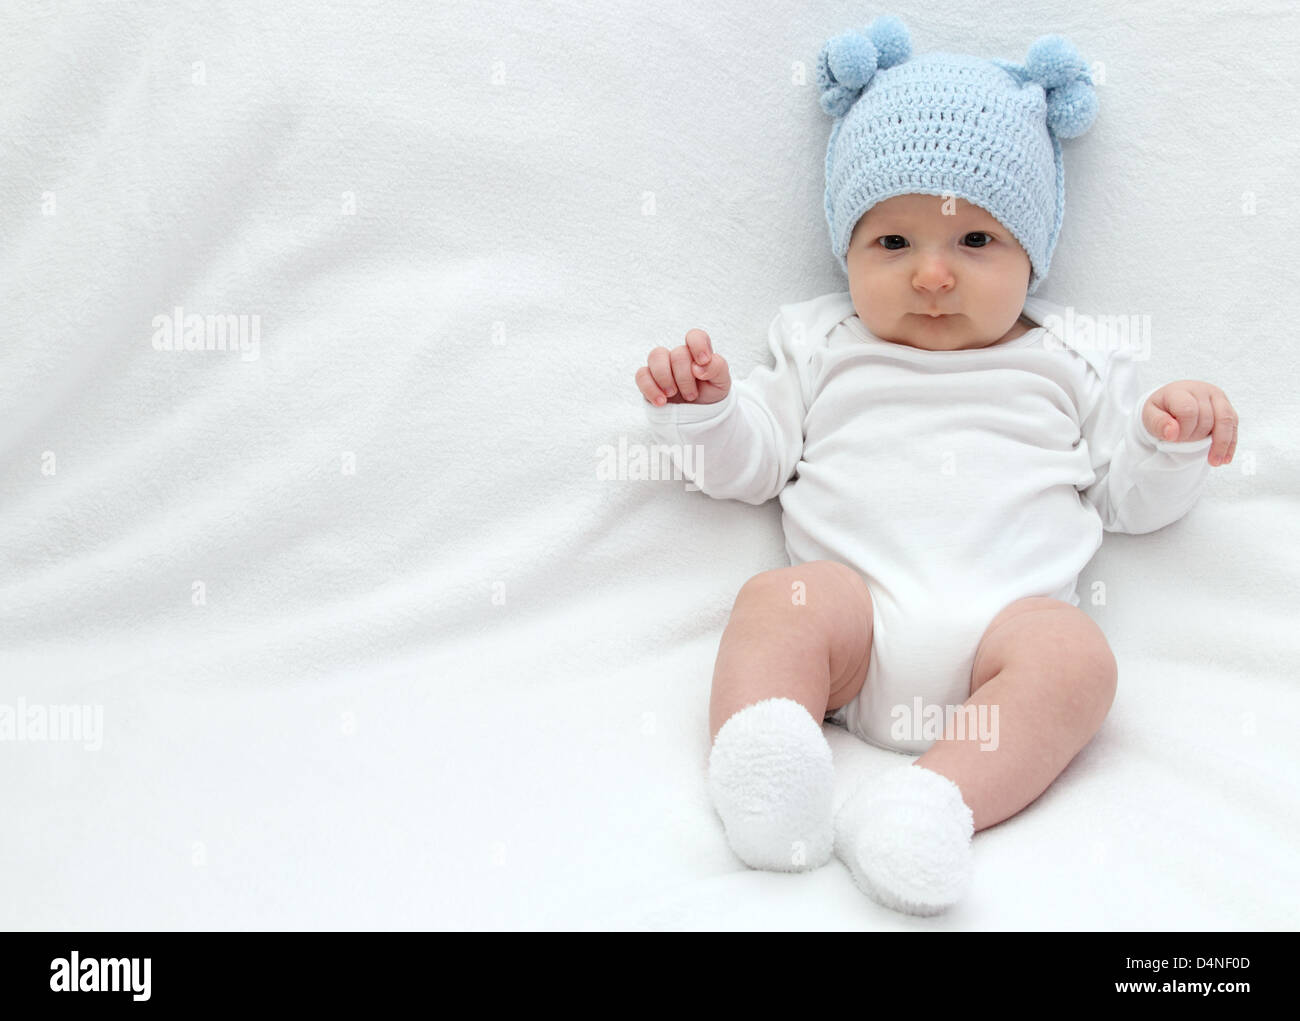 Beautiful baby in blue knitted hat Stock Photo